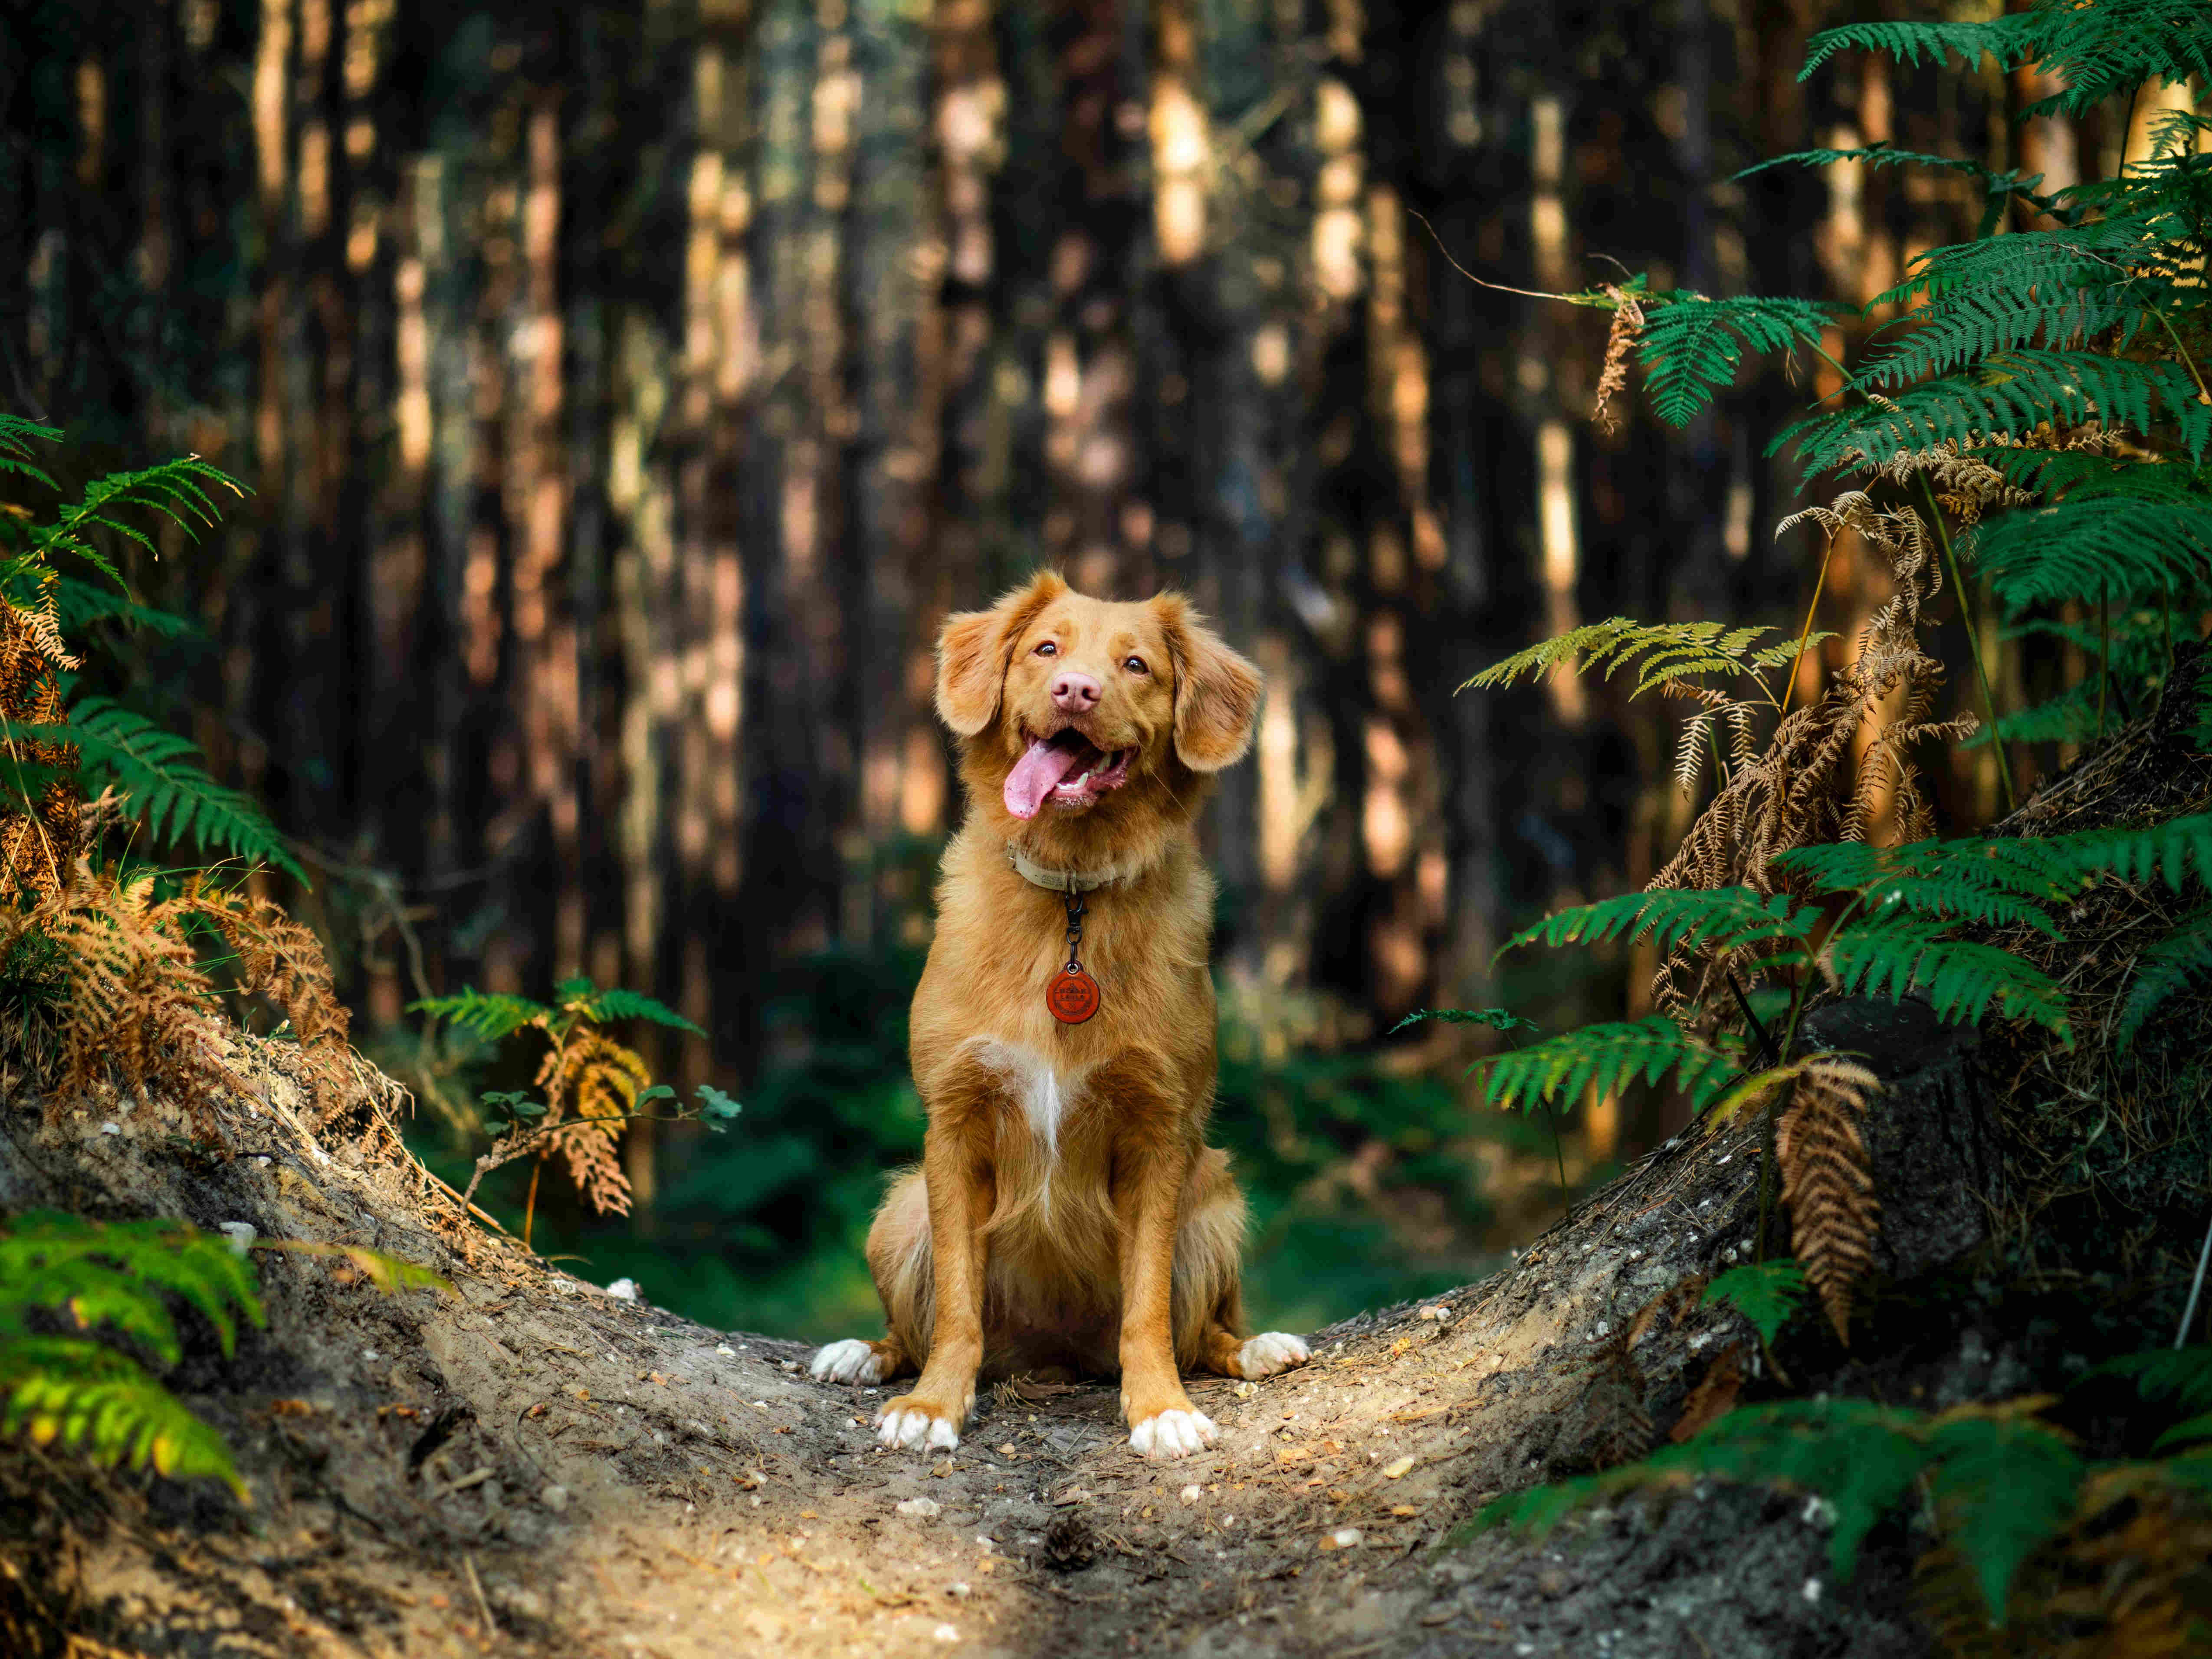 Happy dog in a forest by Jamie street on Unsplash